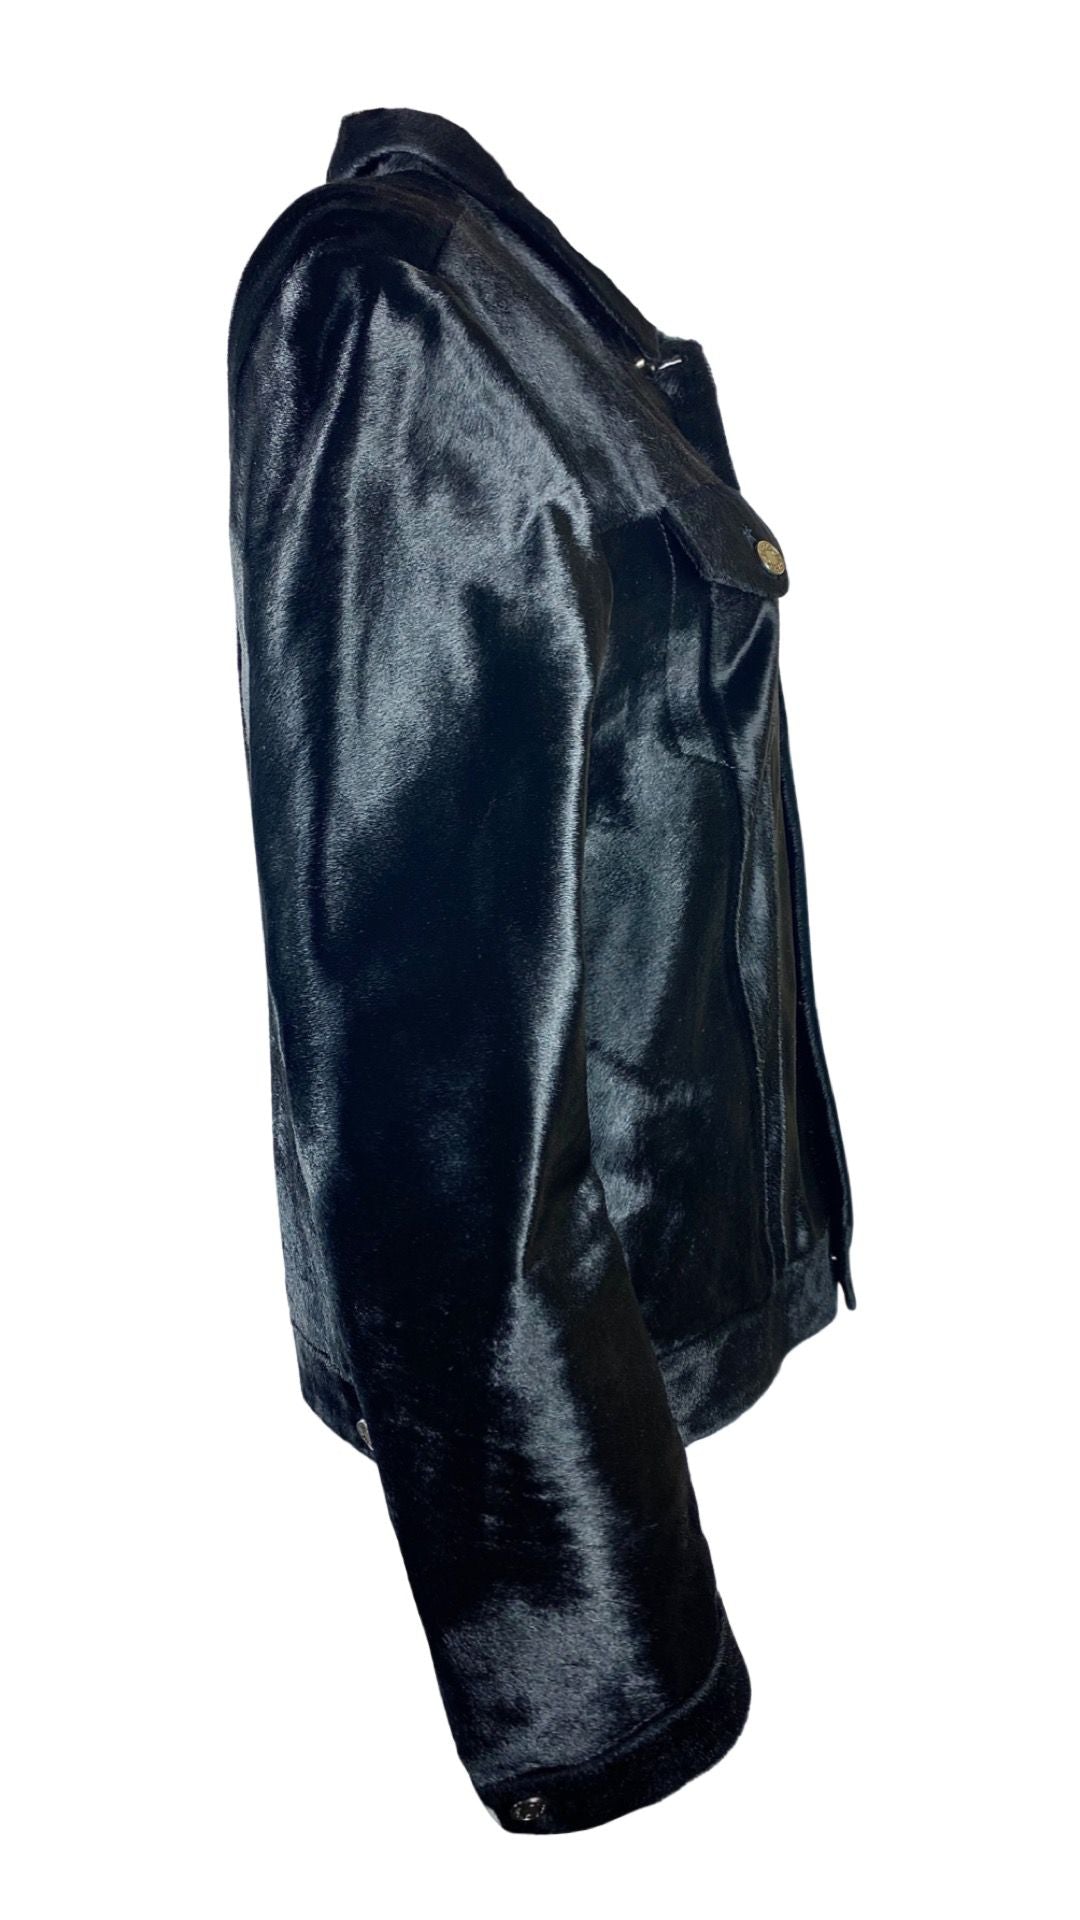 BLOOD BROTHER Black Calf Hair Leather Jean Style Jacket (M)-The Freperie